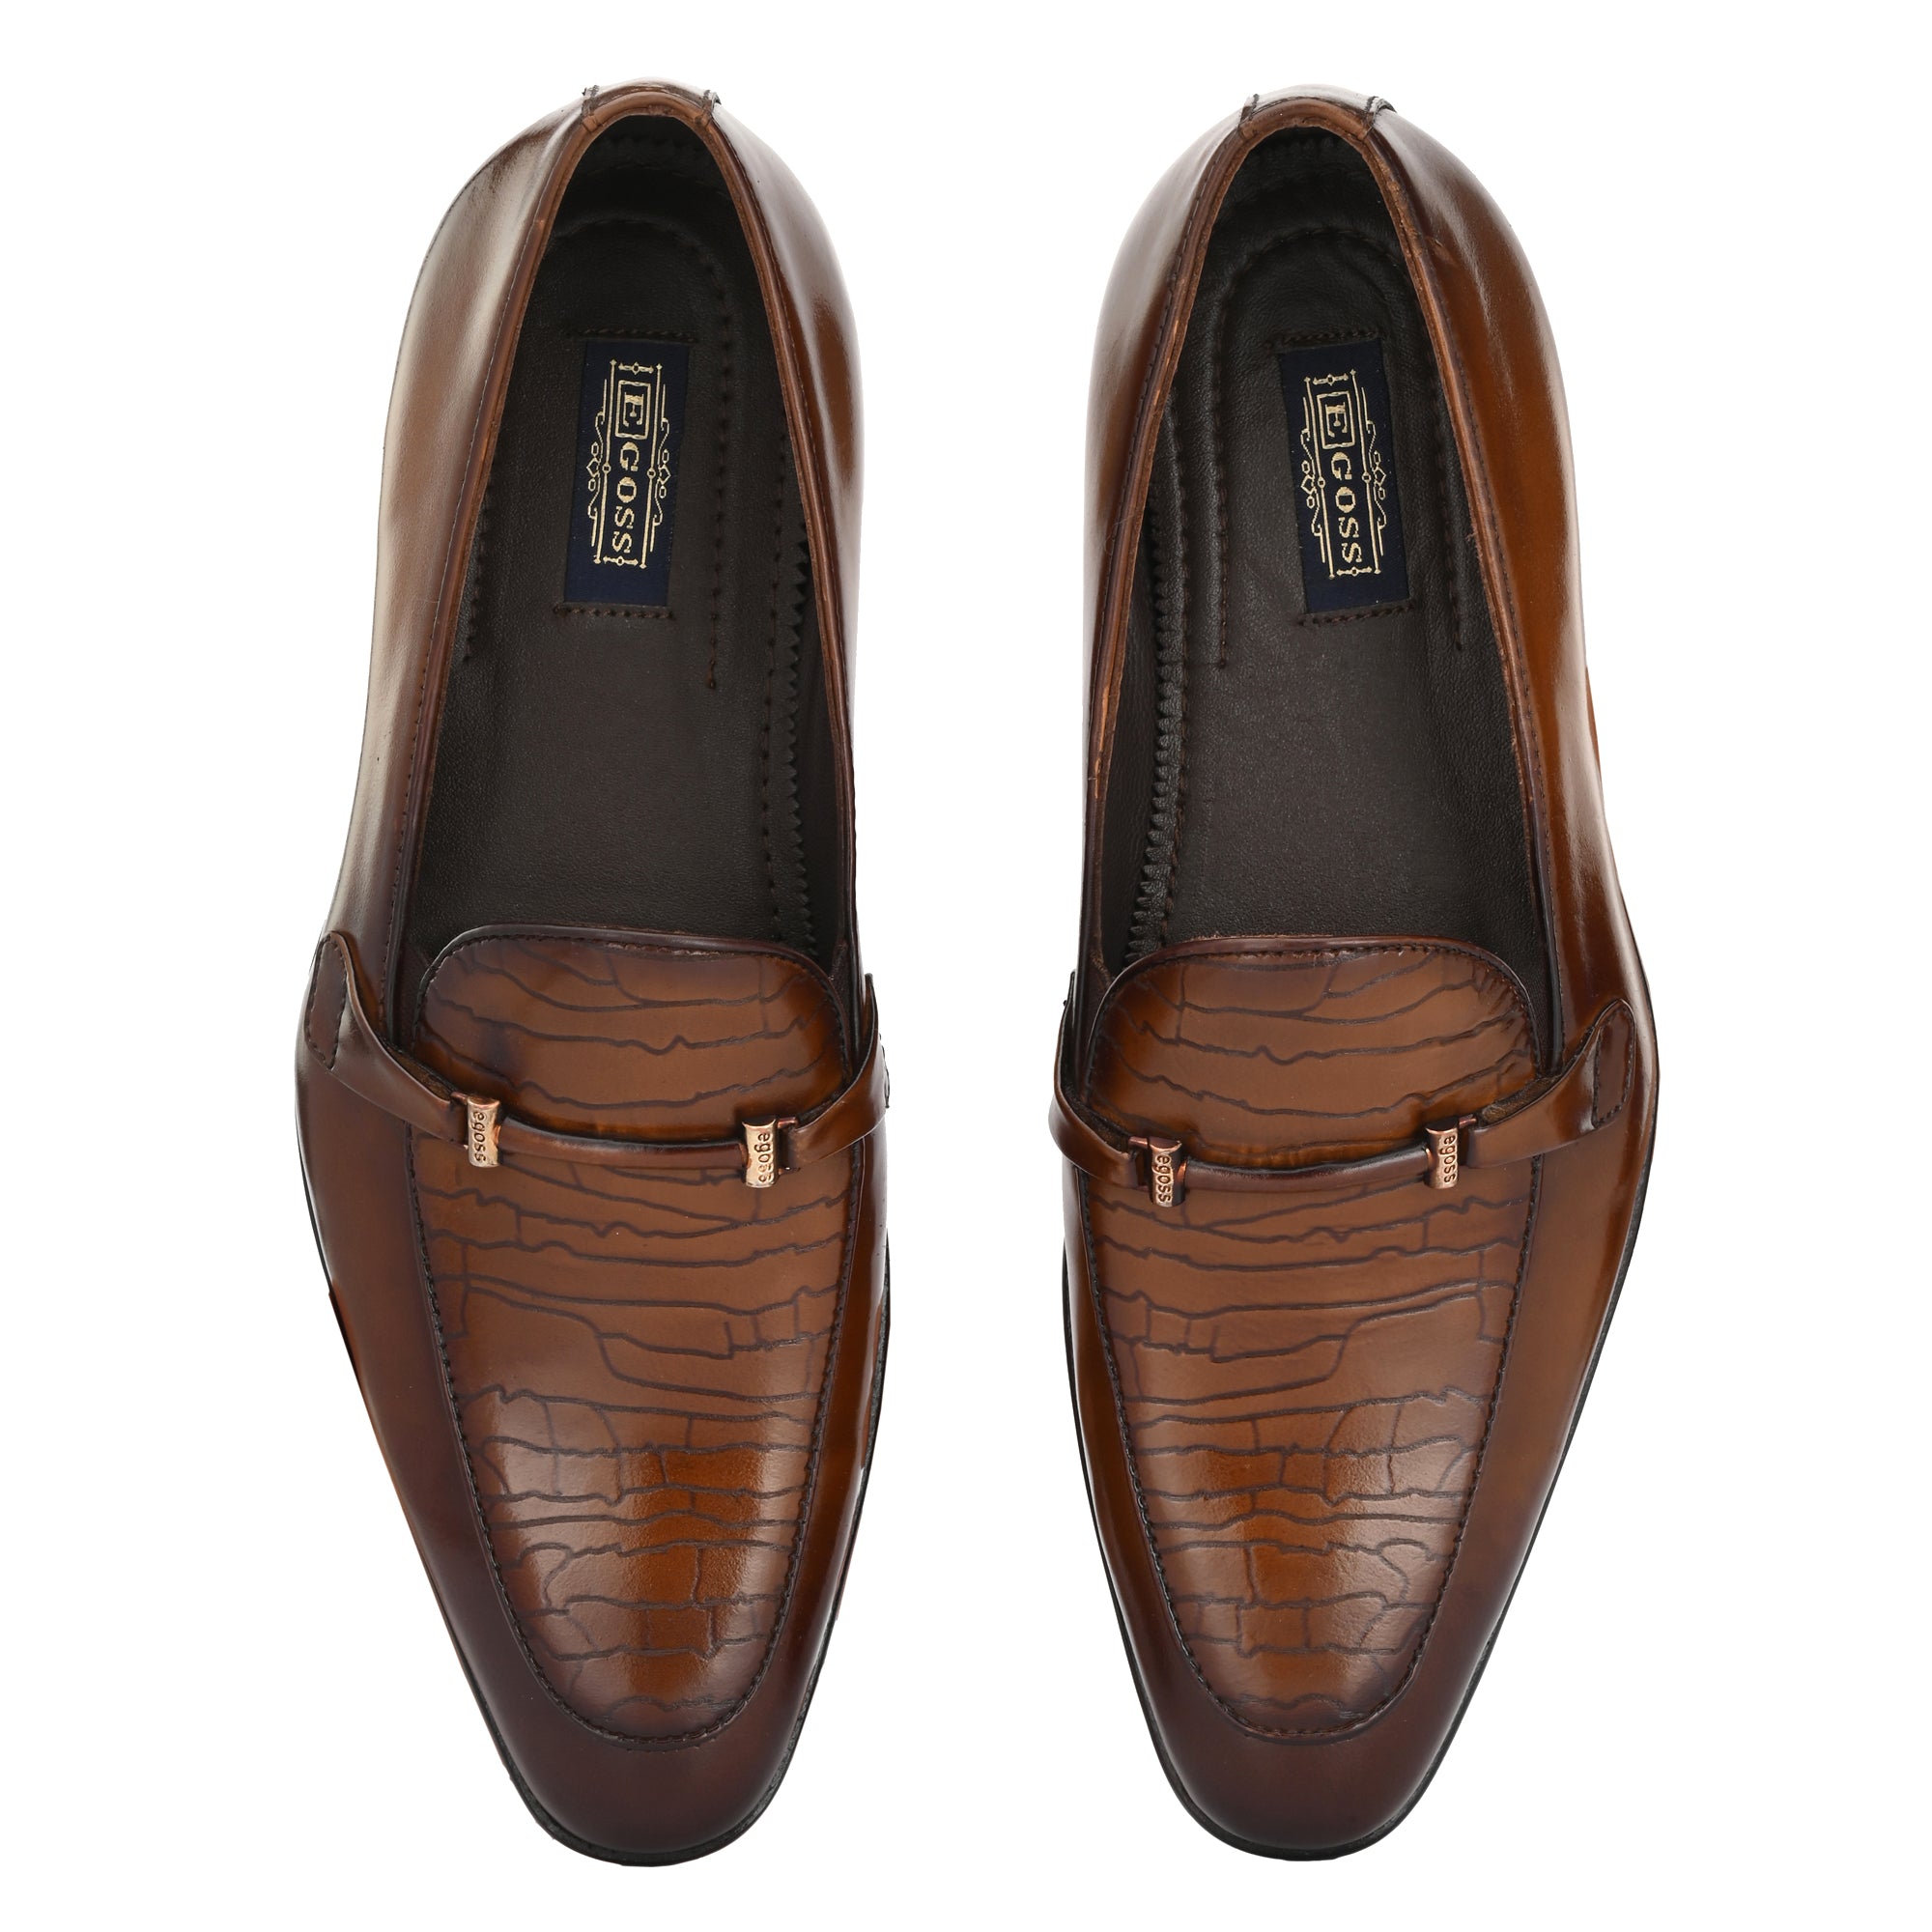 Buckled Formal Loafers For Men by Egoss